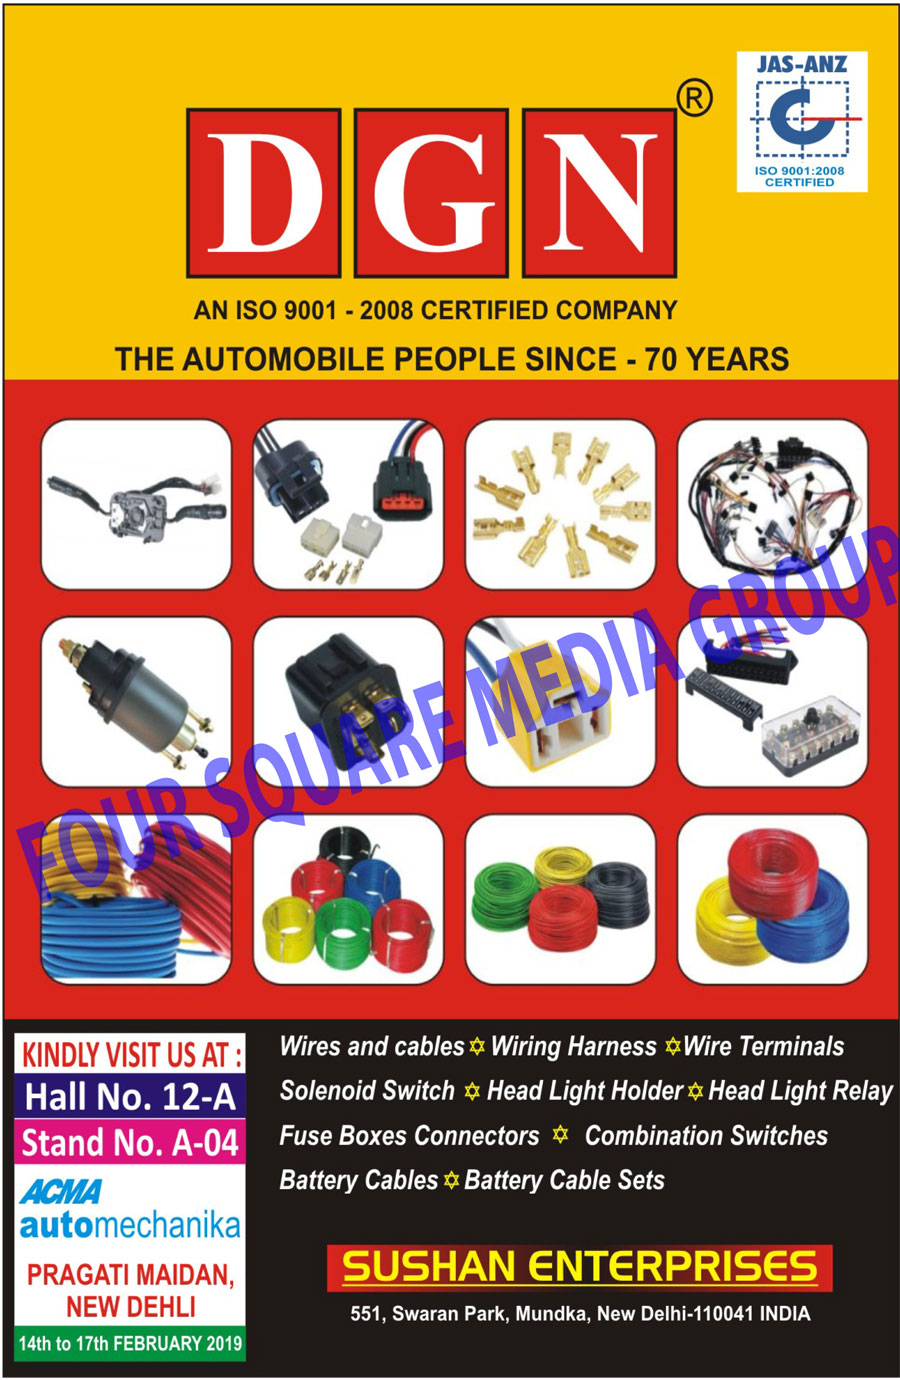 Wires, Cables, Wiring Harnesses, Wire Terminals, Solenoid Switches, Head Light Holders, Fuse Box Connectors, Combination Switches, Battery Cable Sets, Head Light Relays, Battery Cables, Auto Electrical Parts, Automotive Electrical Parts, Automobile Wires, Automobile Cables